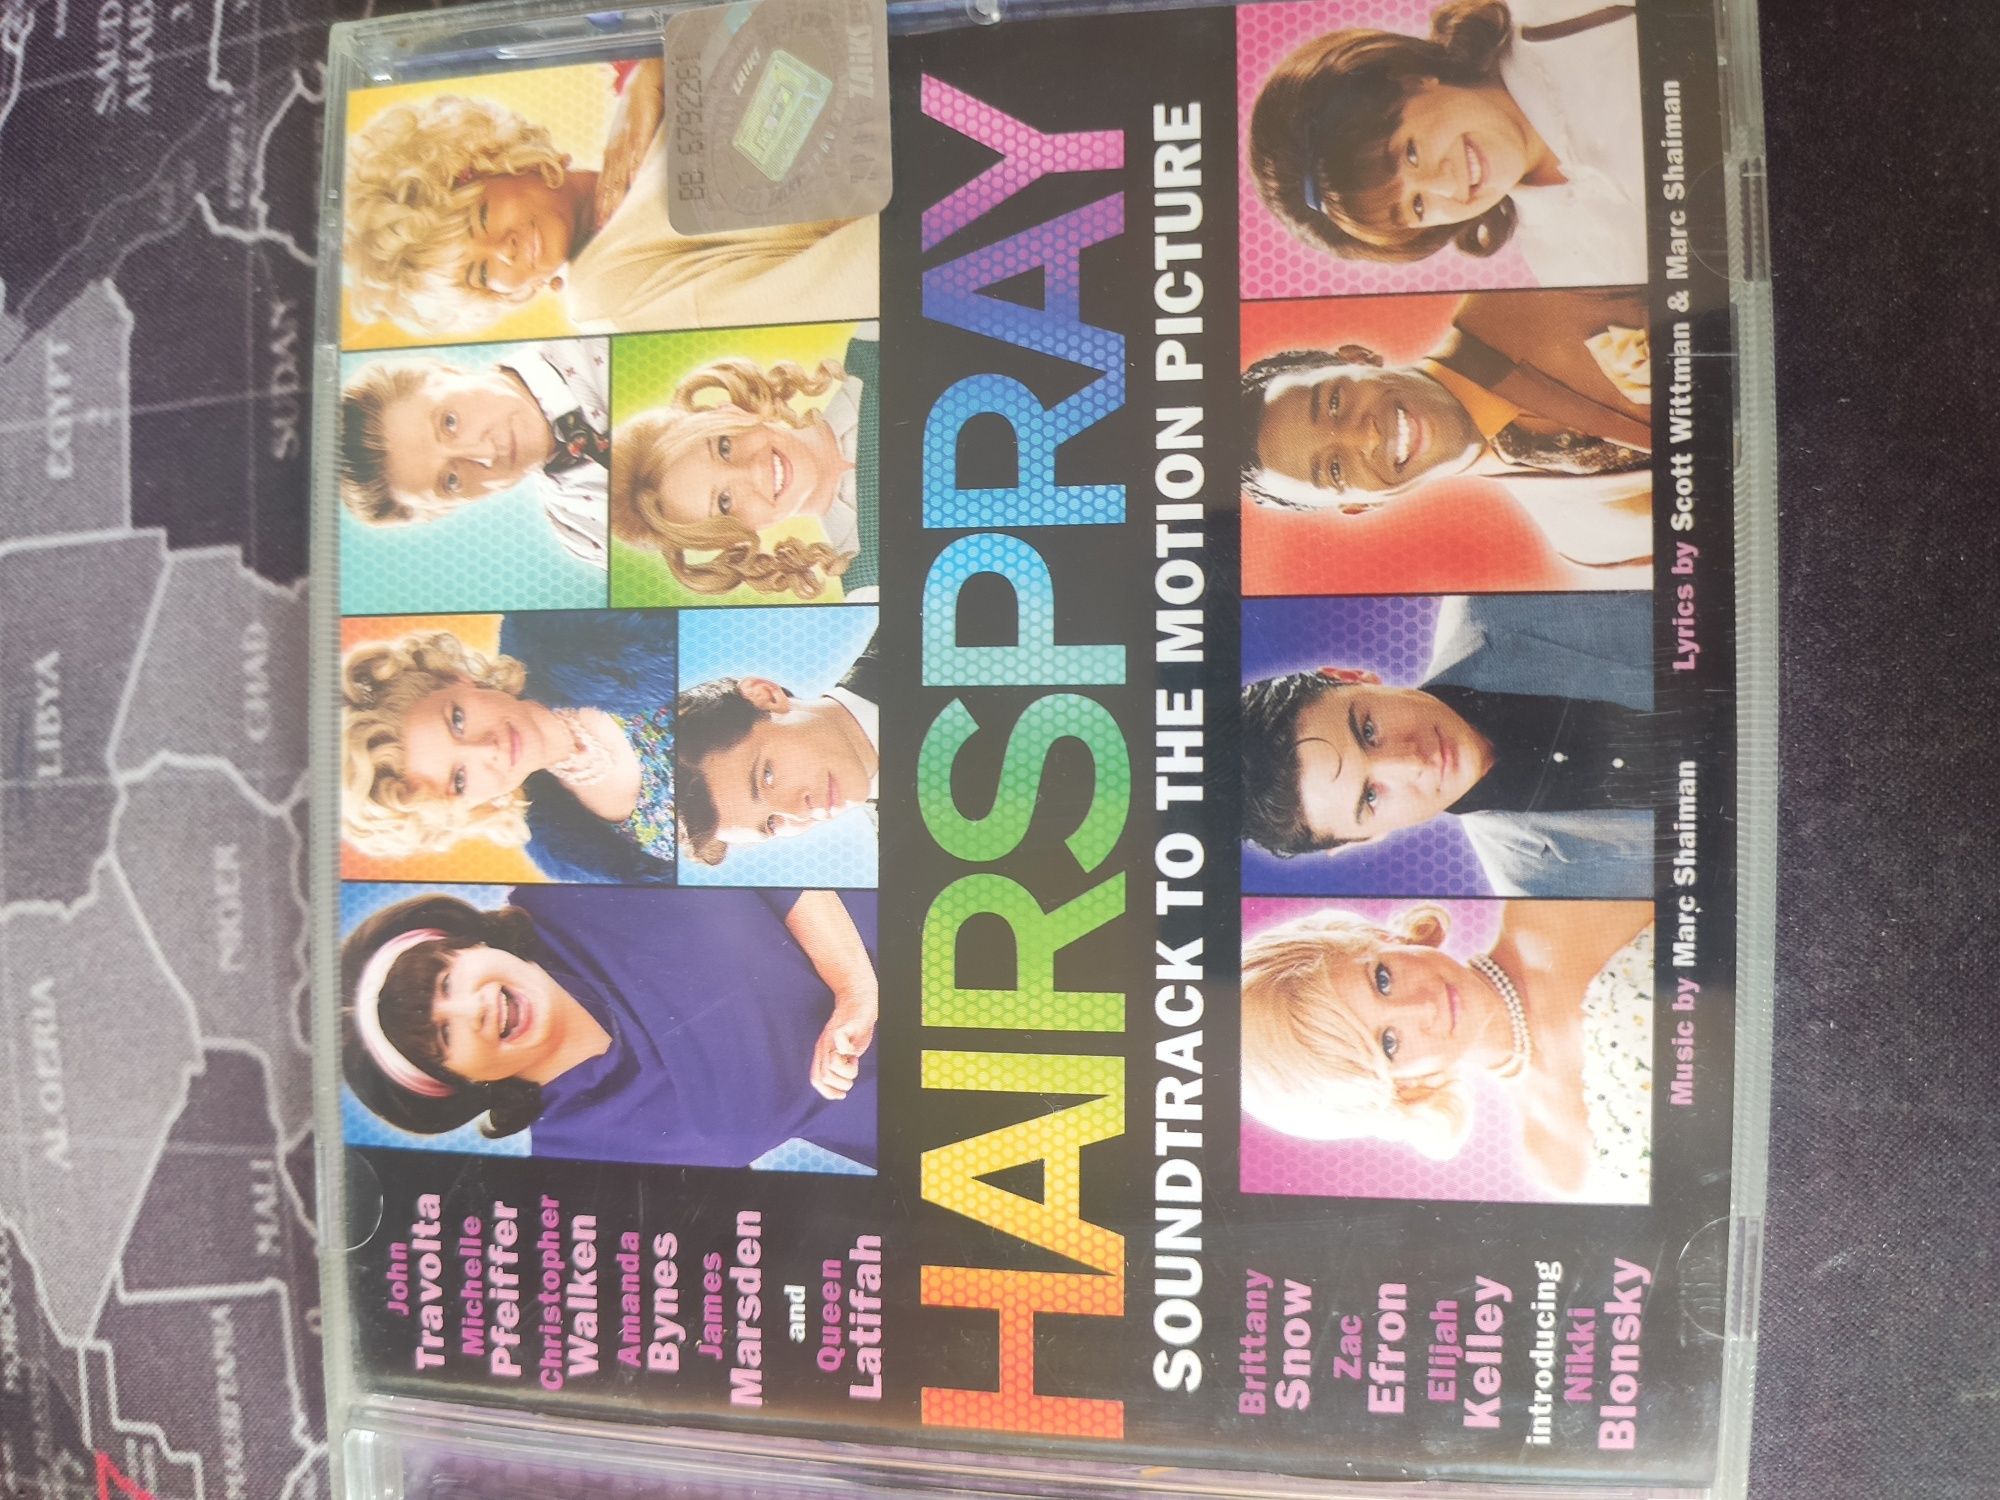 Płyta CD Hairspray Soundtrack to the Motion Picture